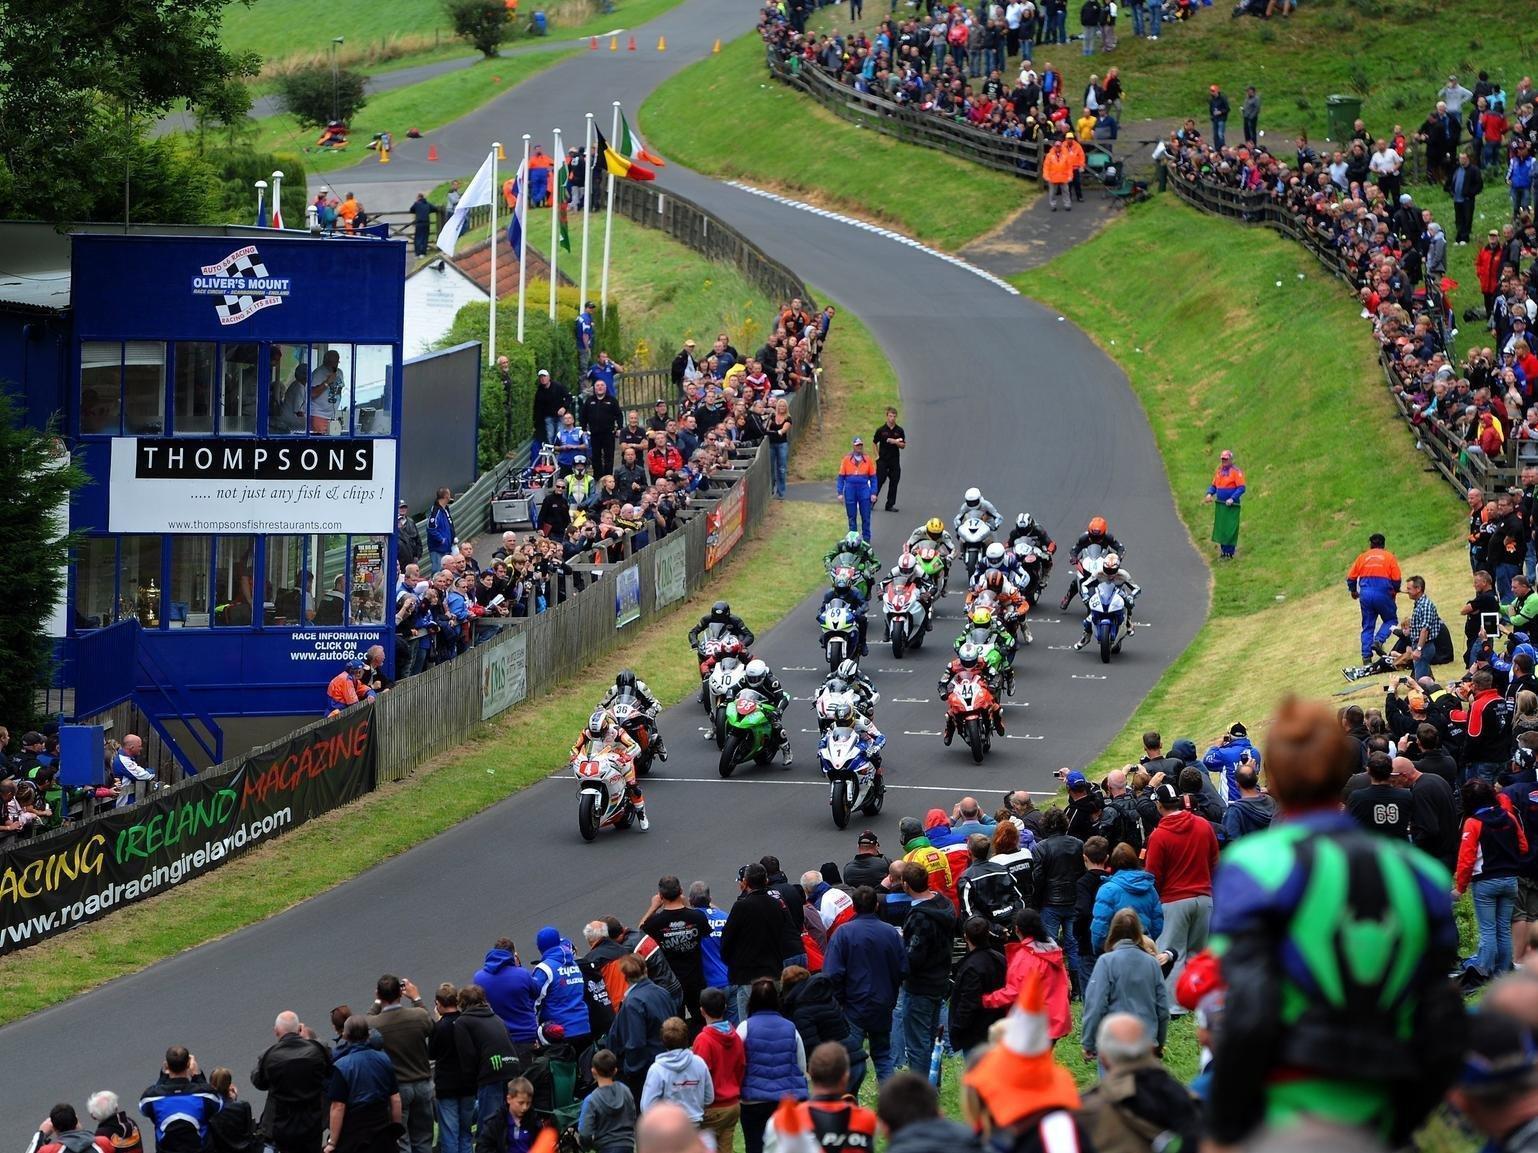 Festival of Speed, Olivers Mount, Scarborough
From 25 April, a powerbike Festival of Speed for the summer,

Marvel at the worlds top motorcyclists as they race around Englands only natural road-race circuit, known as miniature TT by the seaside.